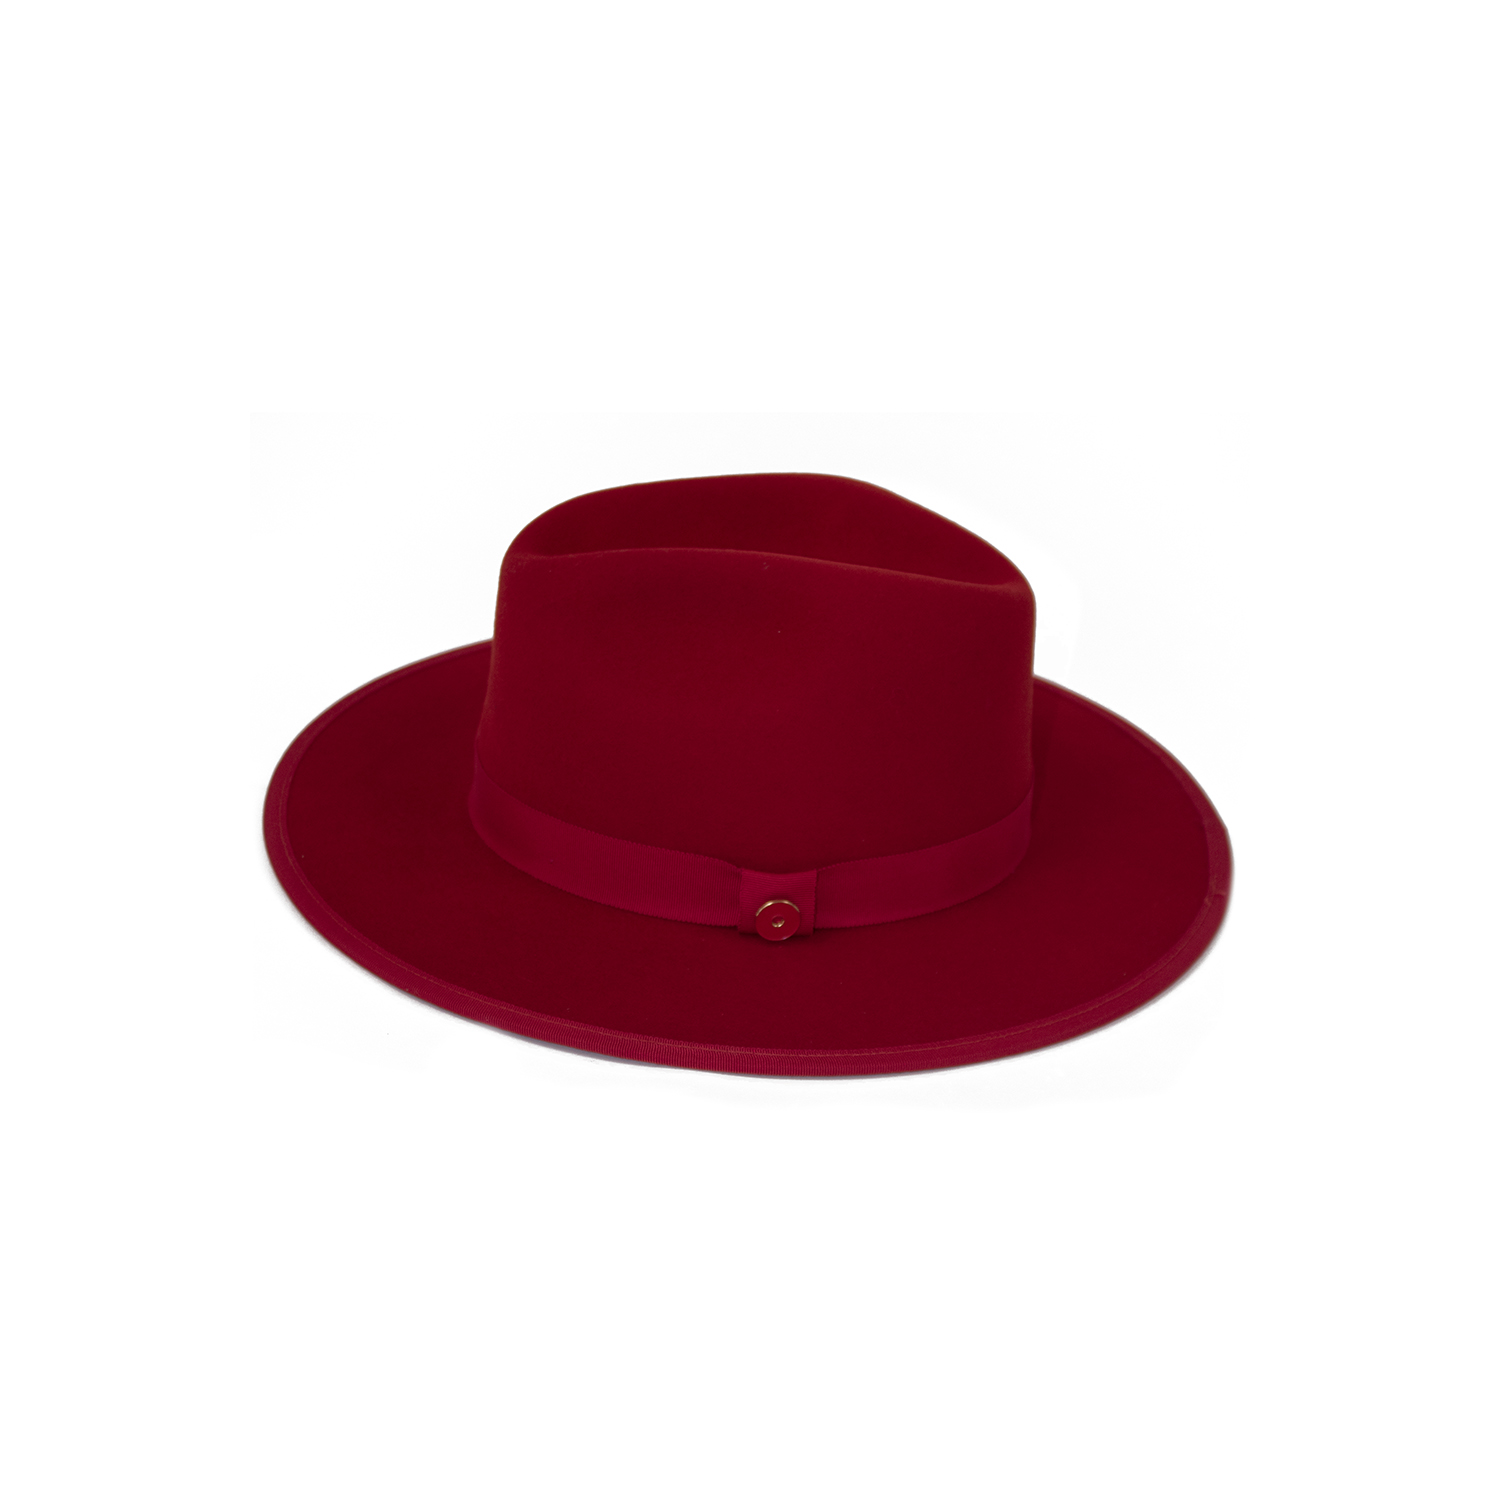 Keith and James Queen hat red - Closet Cash